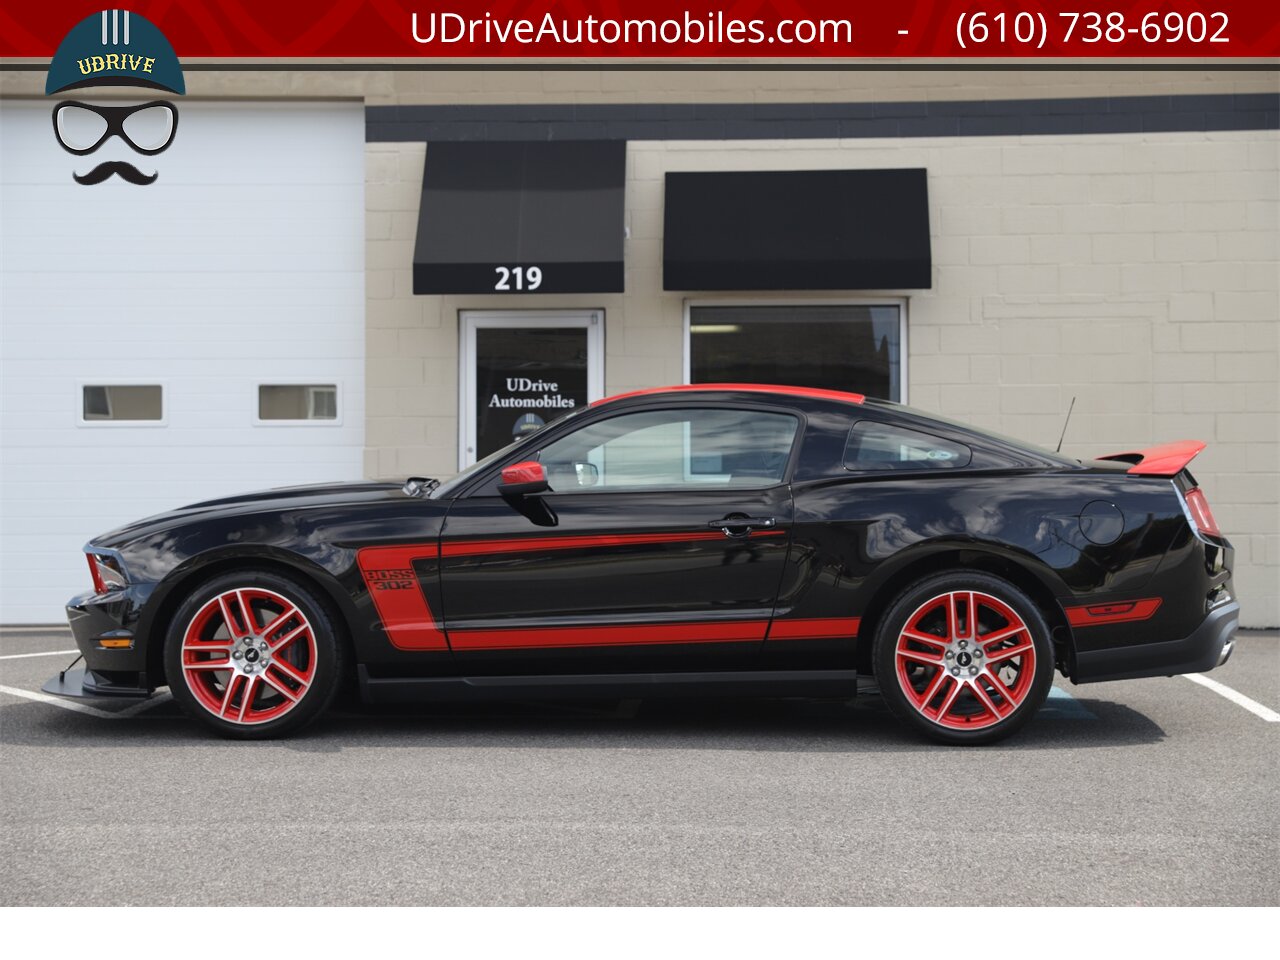 2012 Ford Mustang 866 Miles Boss 302 Laguna Seca #338 of 750  Red TracKey Activated - Photo 6 - West Chester, PA 19382